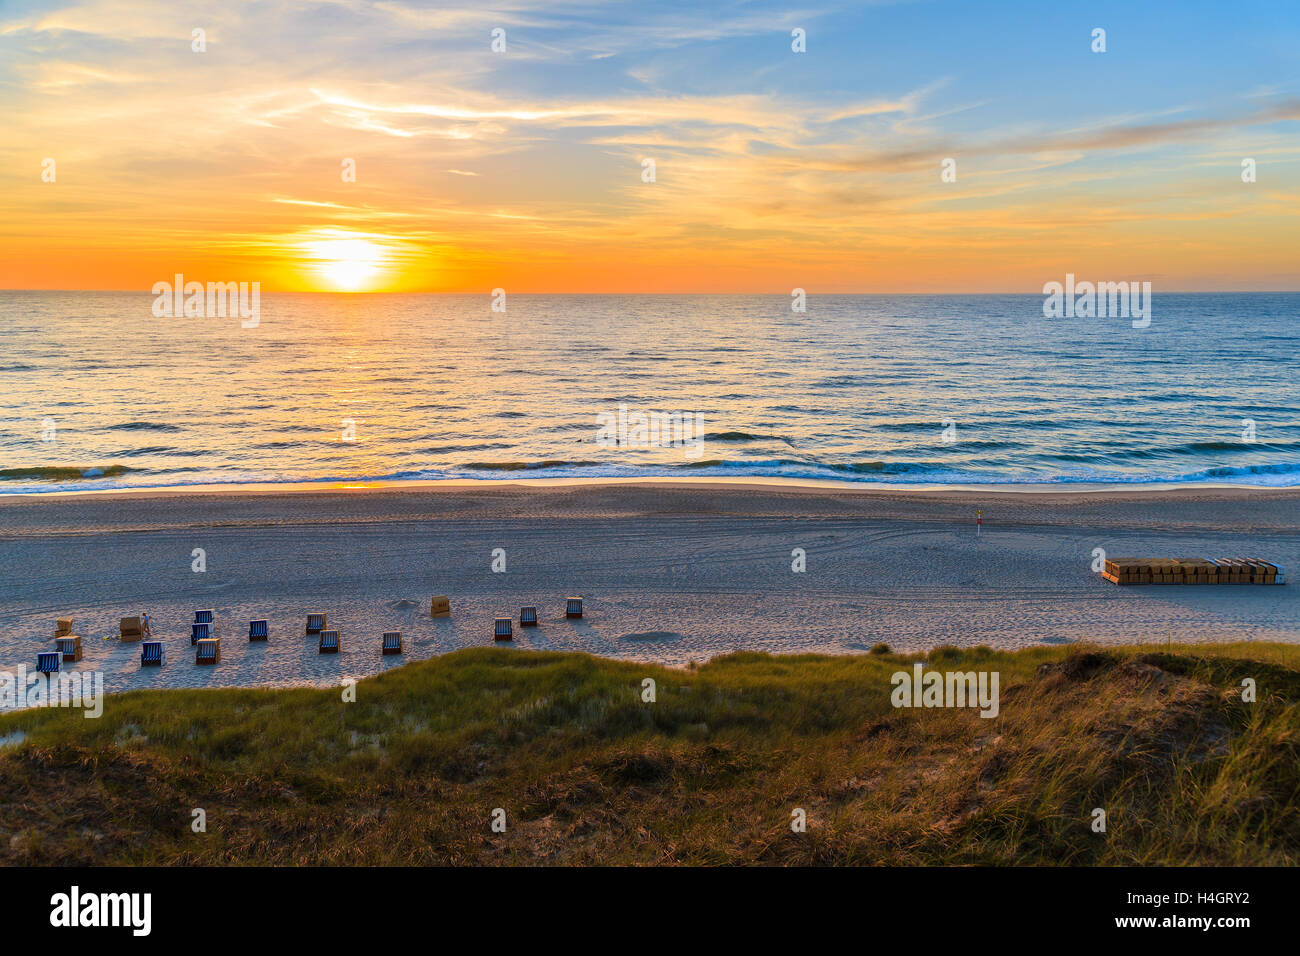 Sunset over sea at beach in Wennigstedt, Sylt island, Germany Stock Photo